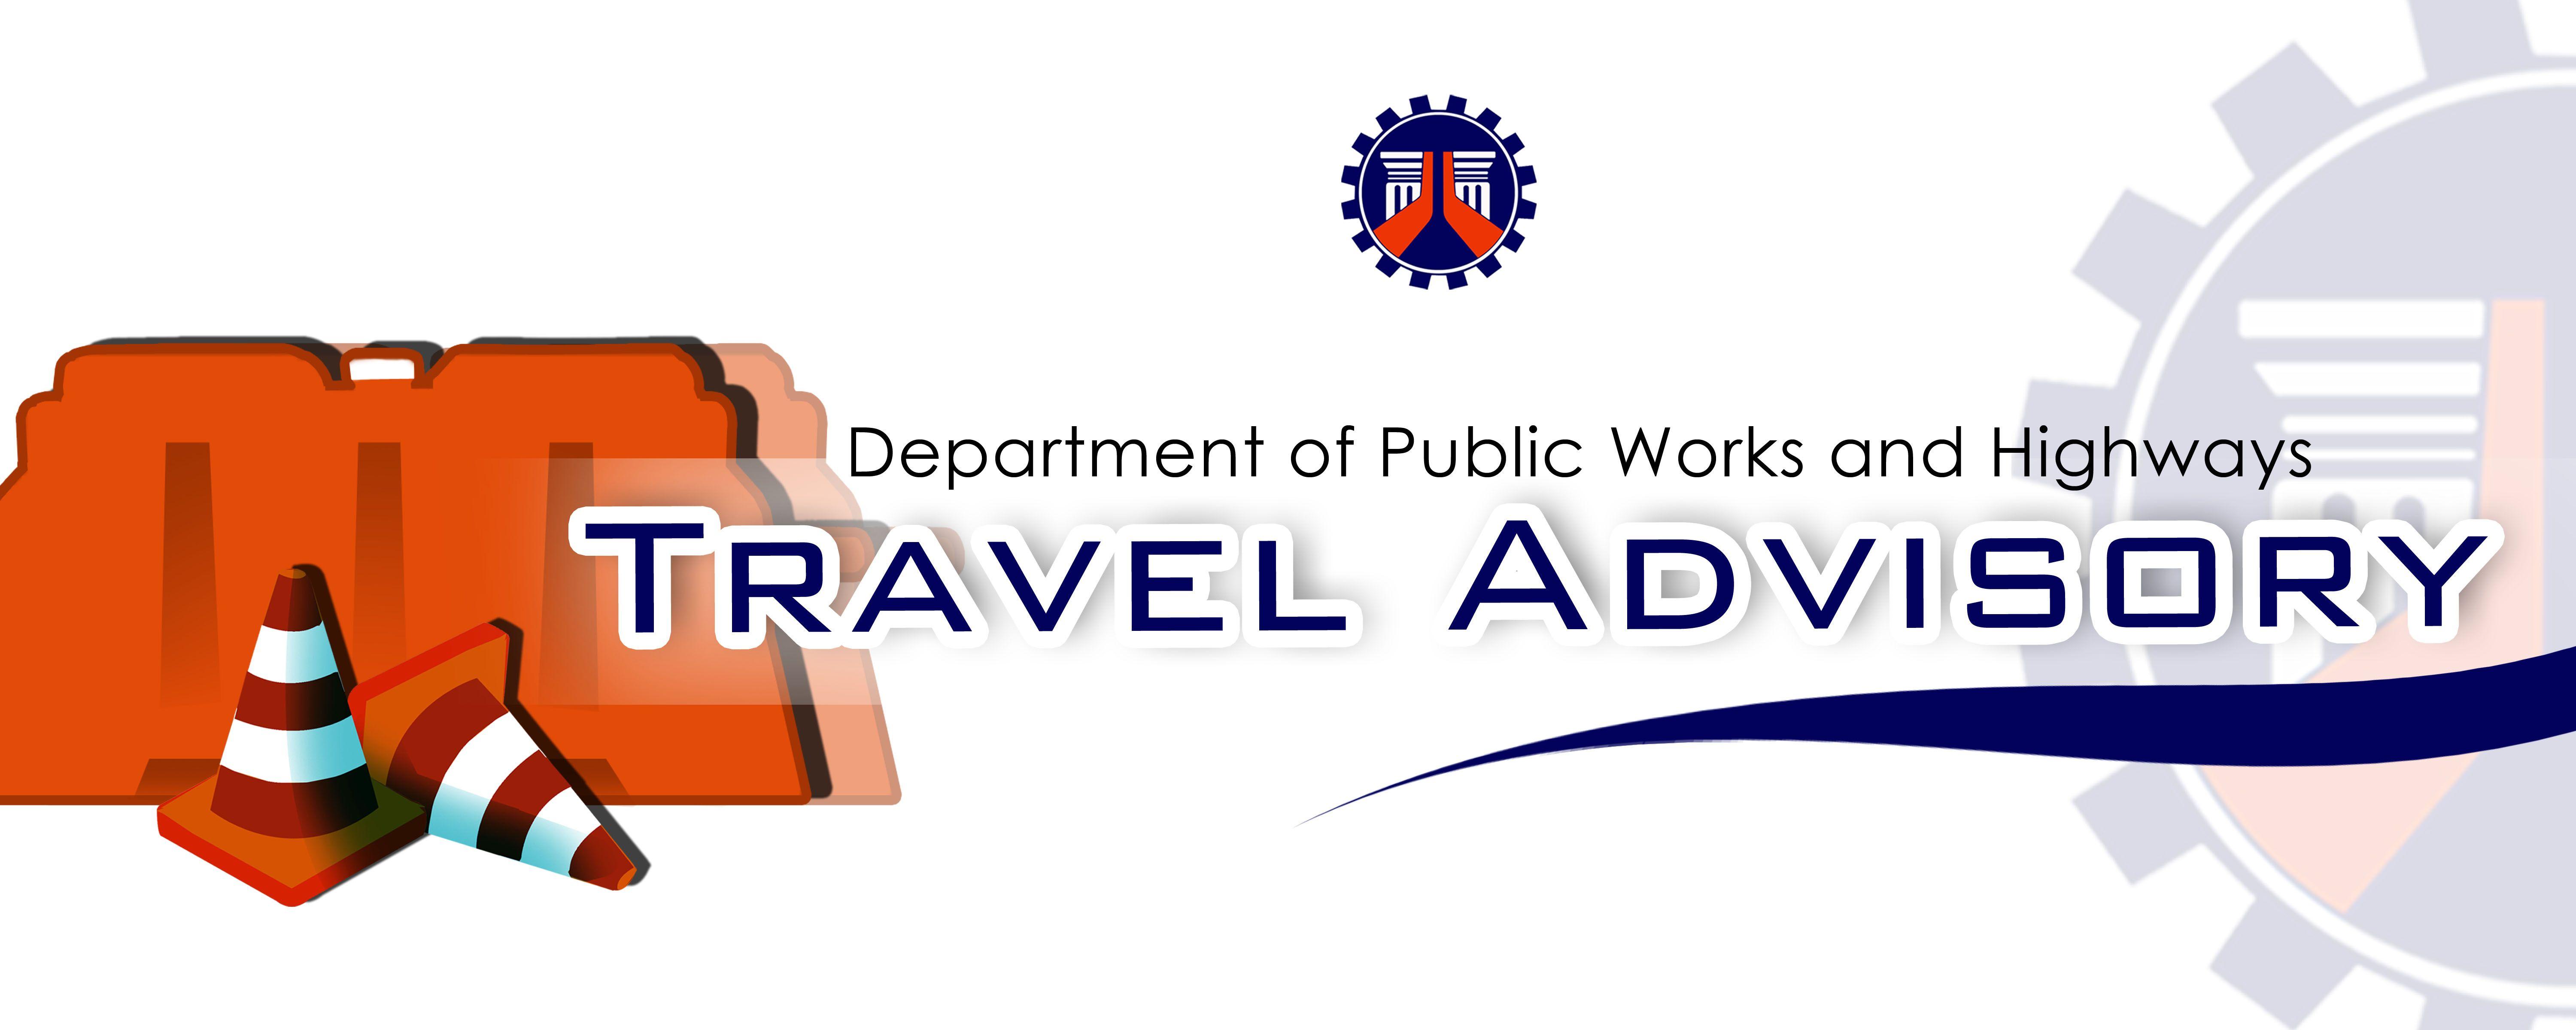 DPWH Logo - News | Department of Public Works and Highways